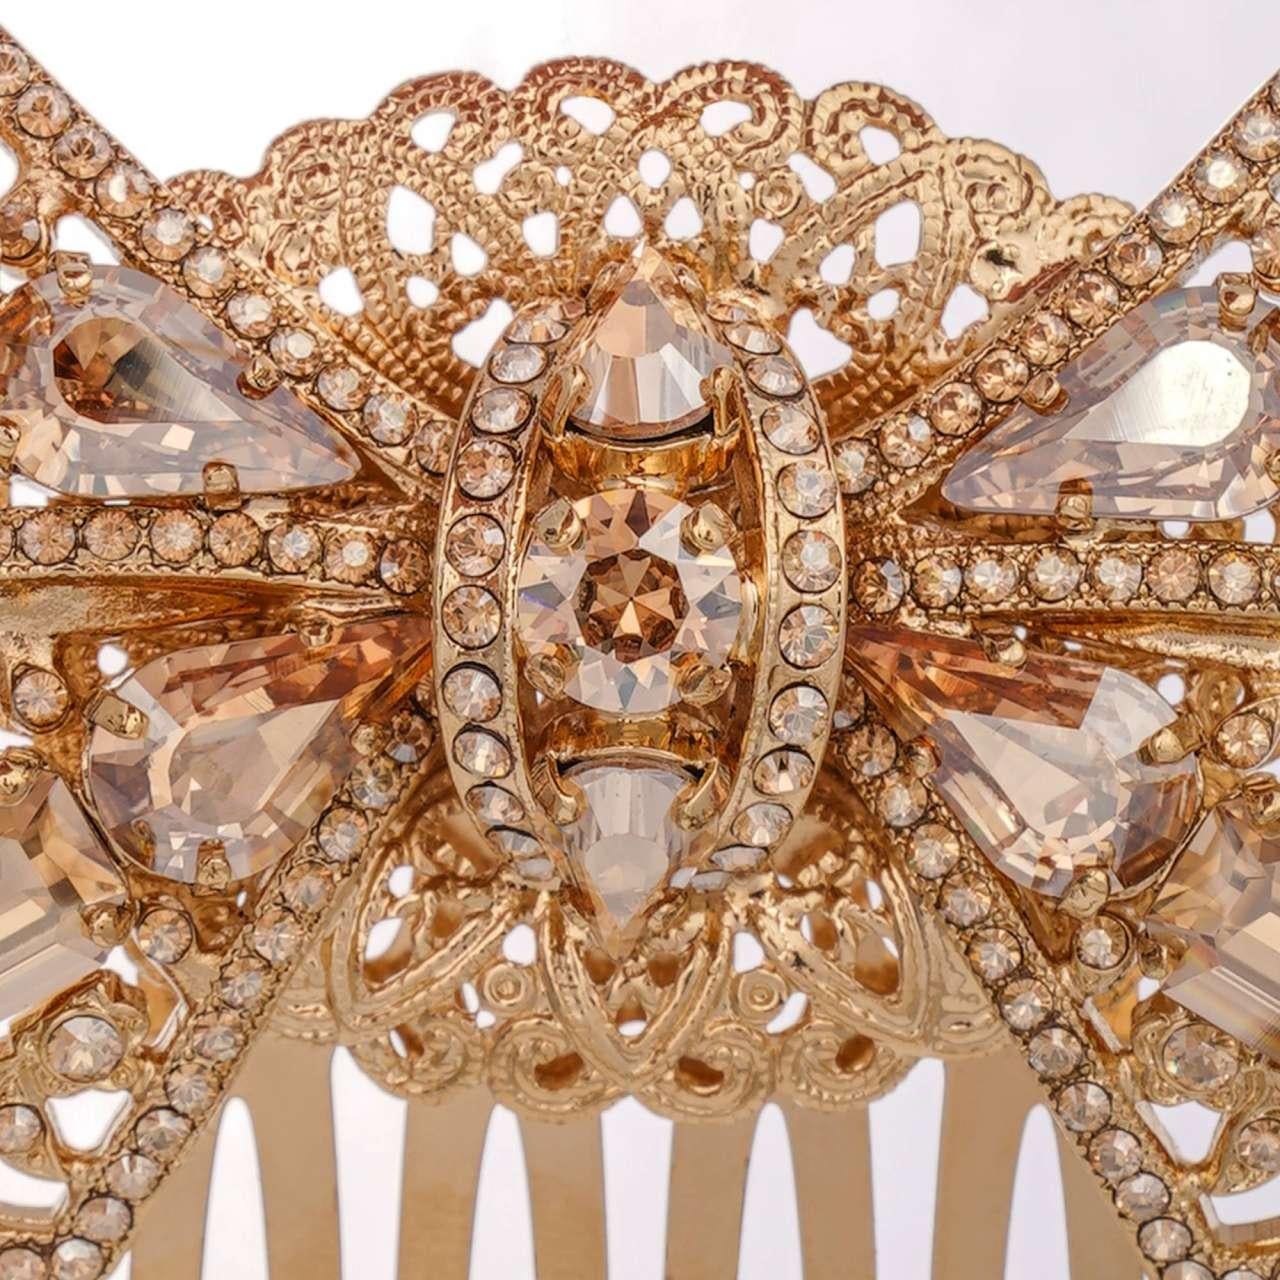 - Ribbon Hair Clip with filigree details and crystals in Gold by DOLCE & GABBANA - RUNWAY - Dolce & Gabbana Fashion Show - Former RRP: EUR 975 - New with Tag - MADE IN ITALY - Beige crystals - Nickel free - Model: WOL4F1-W1111-Z0000 - Material: 70%